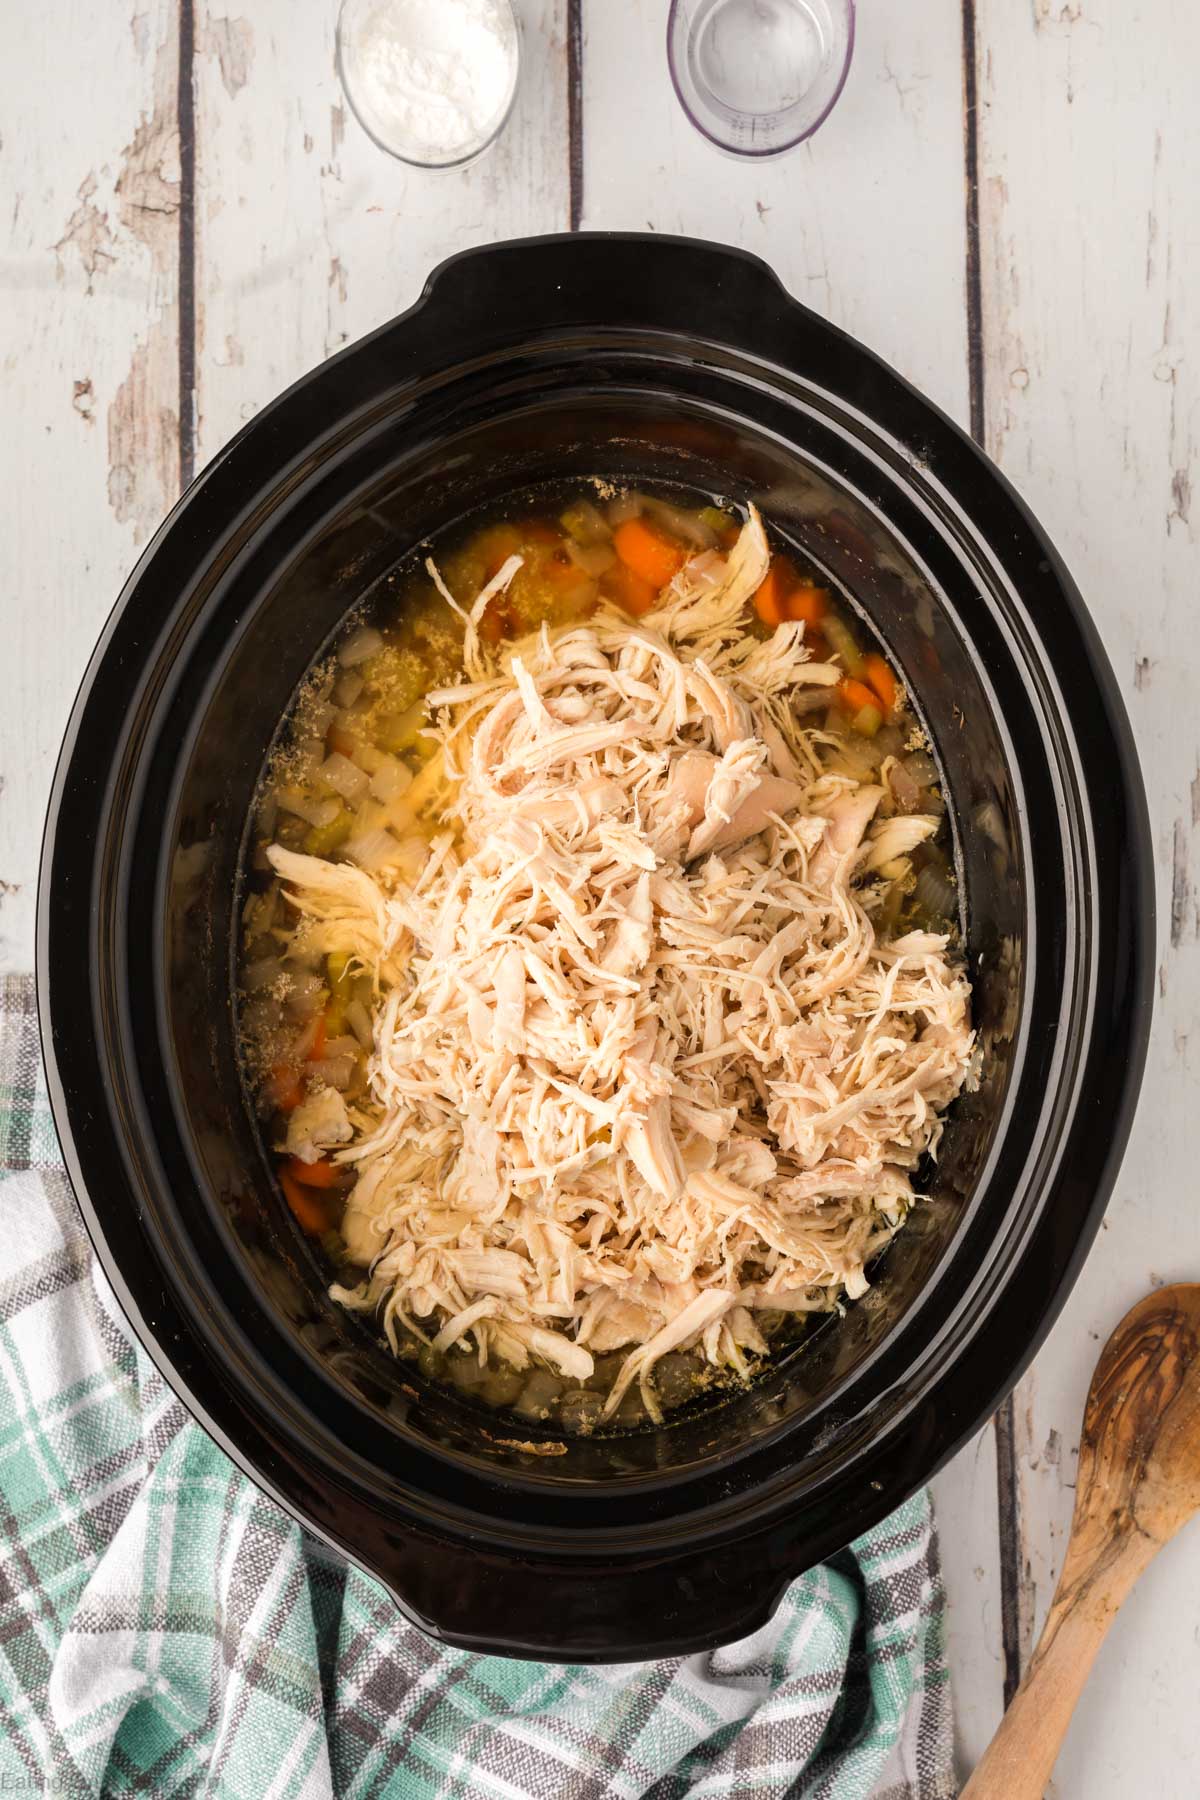 Placing shredded chicken back in the slow cooker